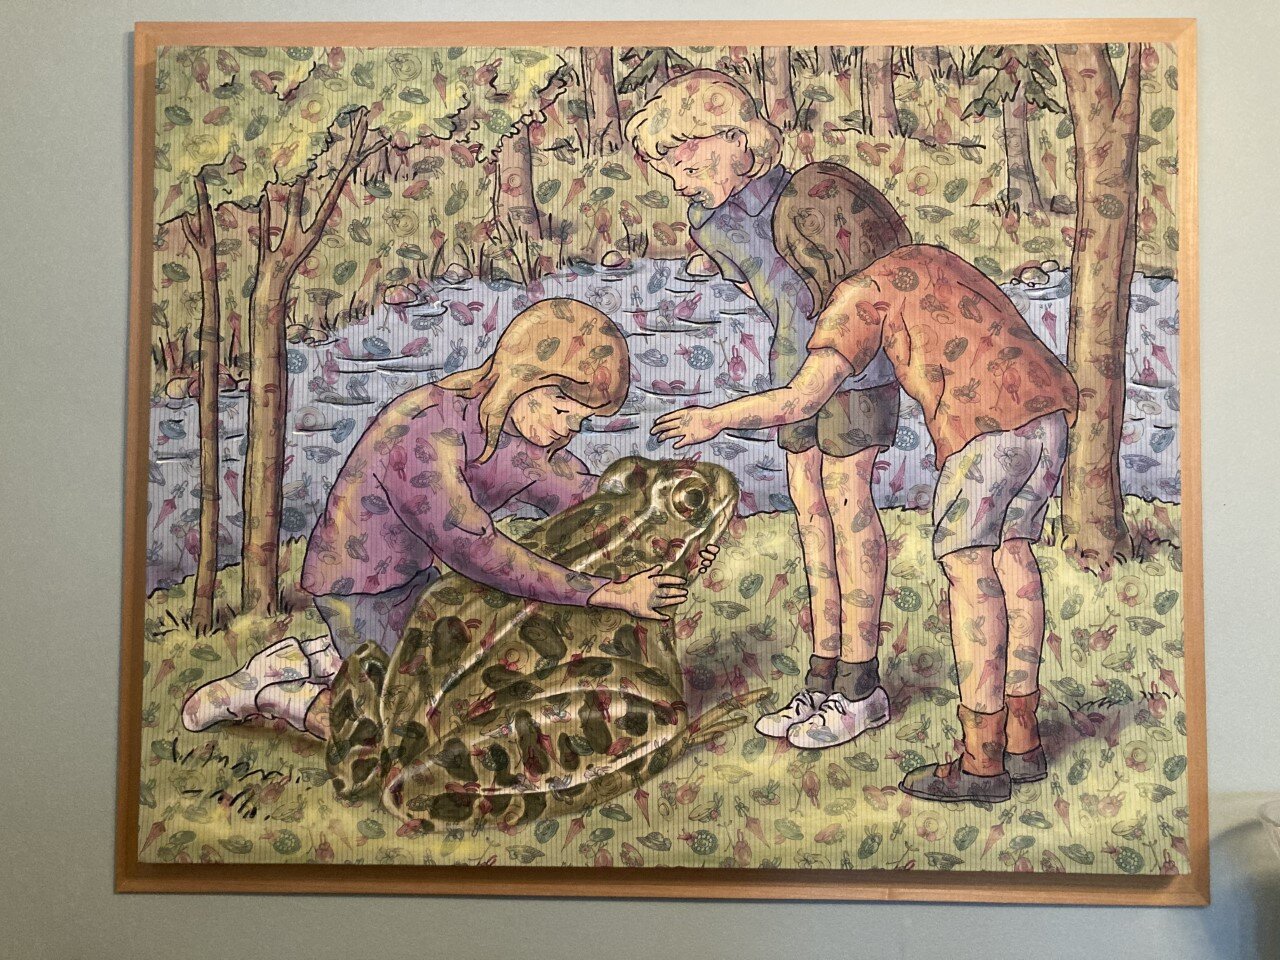   Three Girls and a Frog   32”x40”  acrylic on commercially printed fabric  1995  PRIVATE COLLECTION 